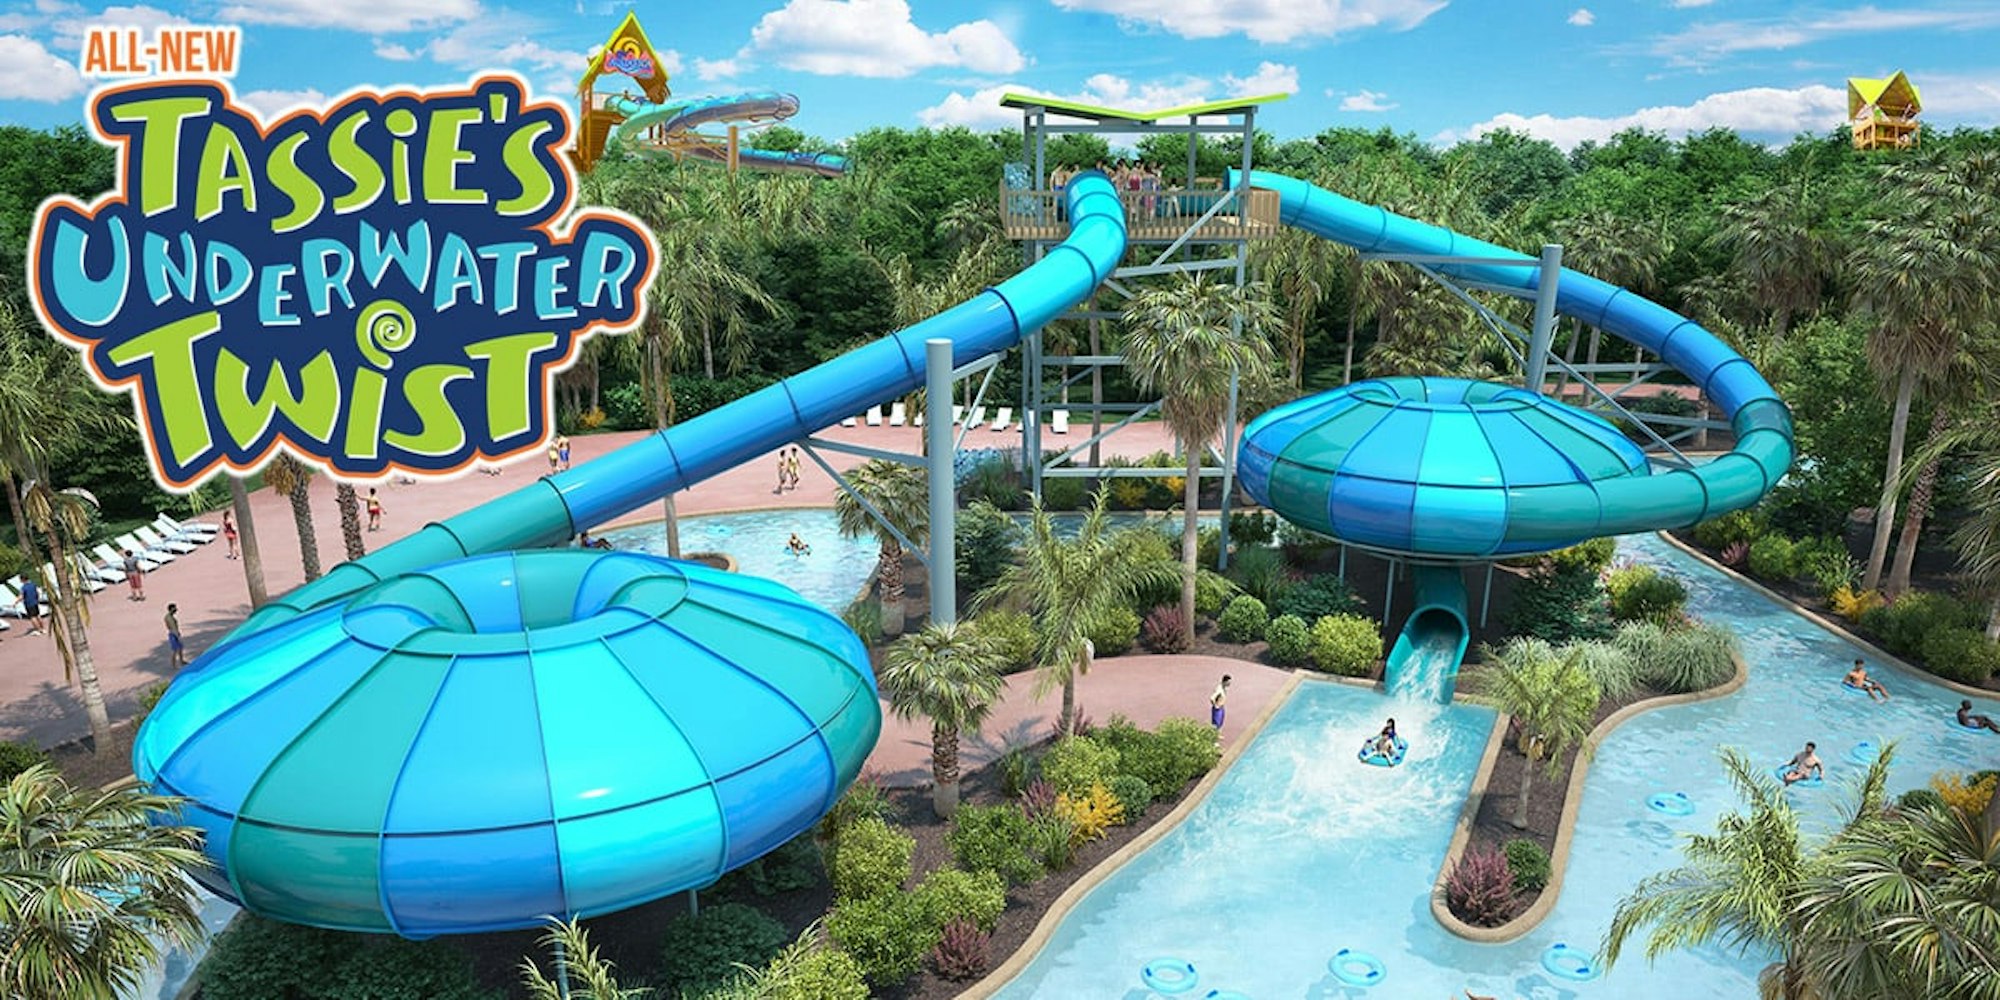 Cover Image for Aquatica Brings Florida's Most Immersive Water Slide to Orlando